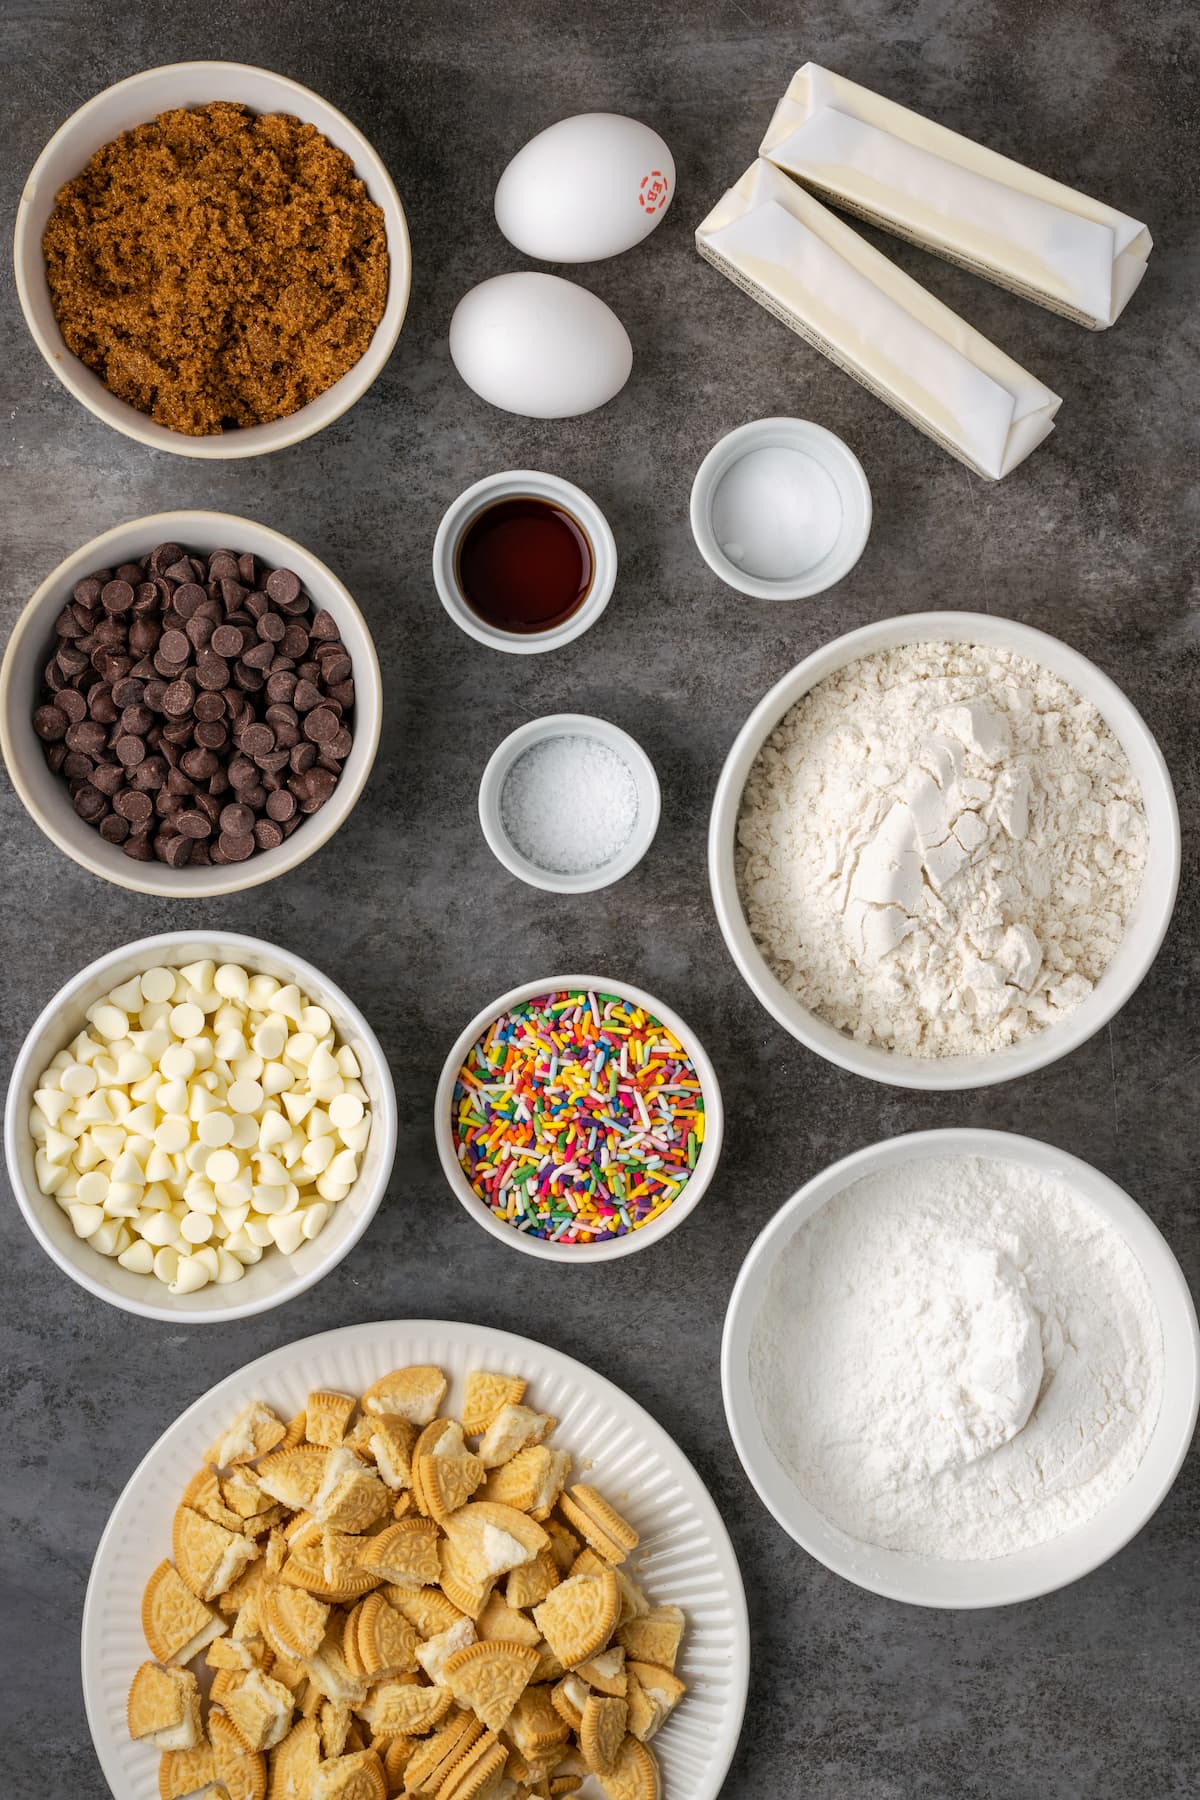 The ingredients for birthday cake chocolate chip cookies.